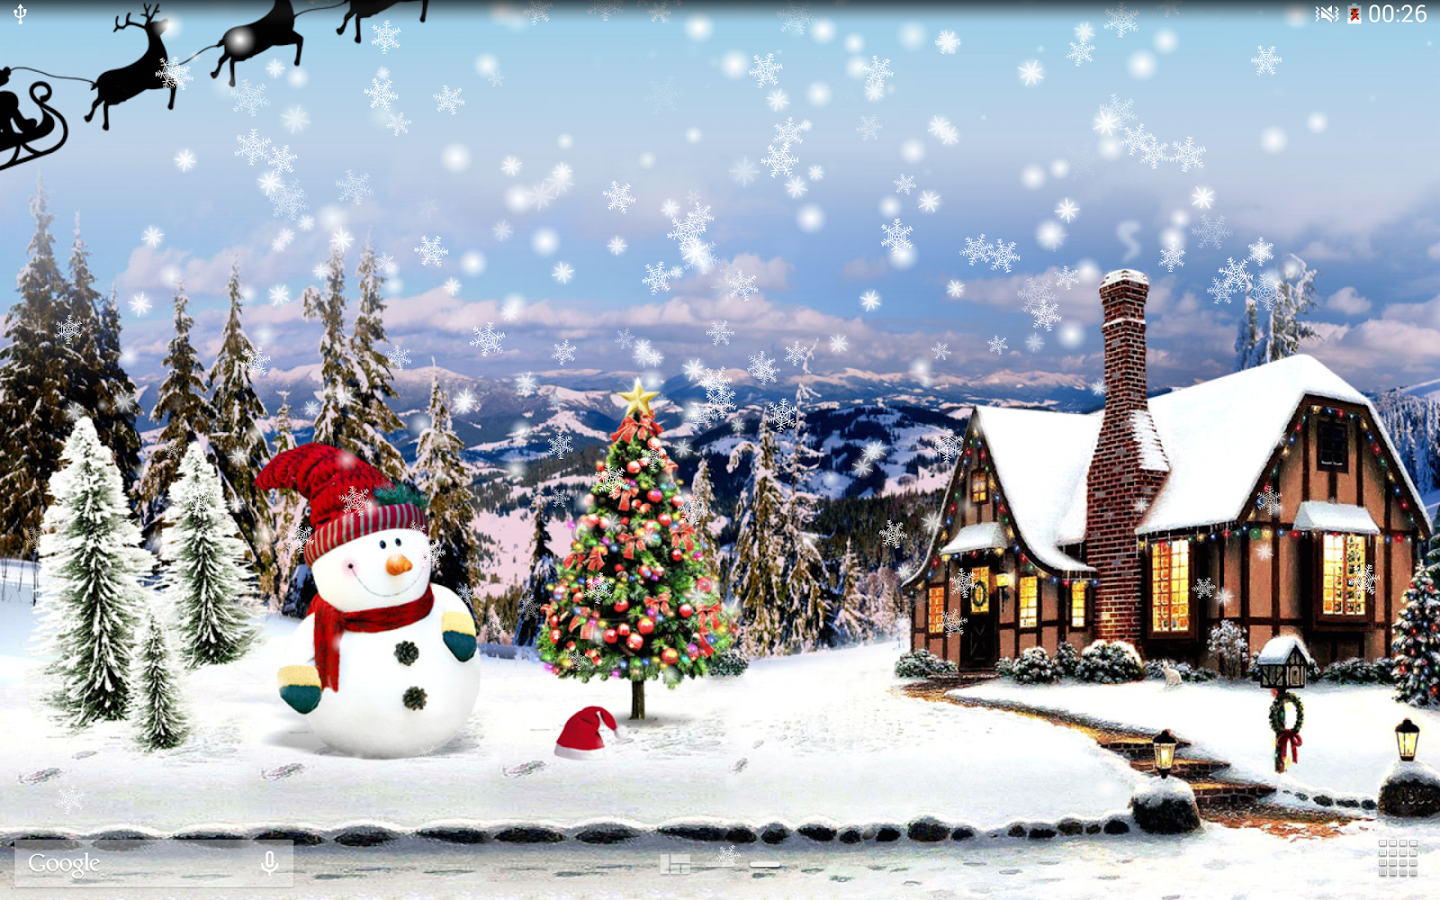 Free Christmas Live Wallpaper For Android Christmas Wallpaper Live